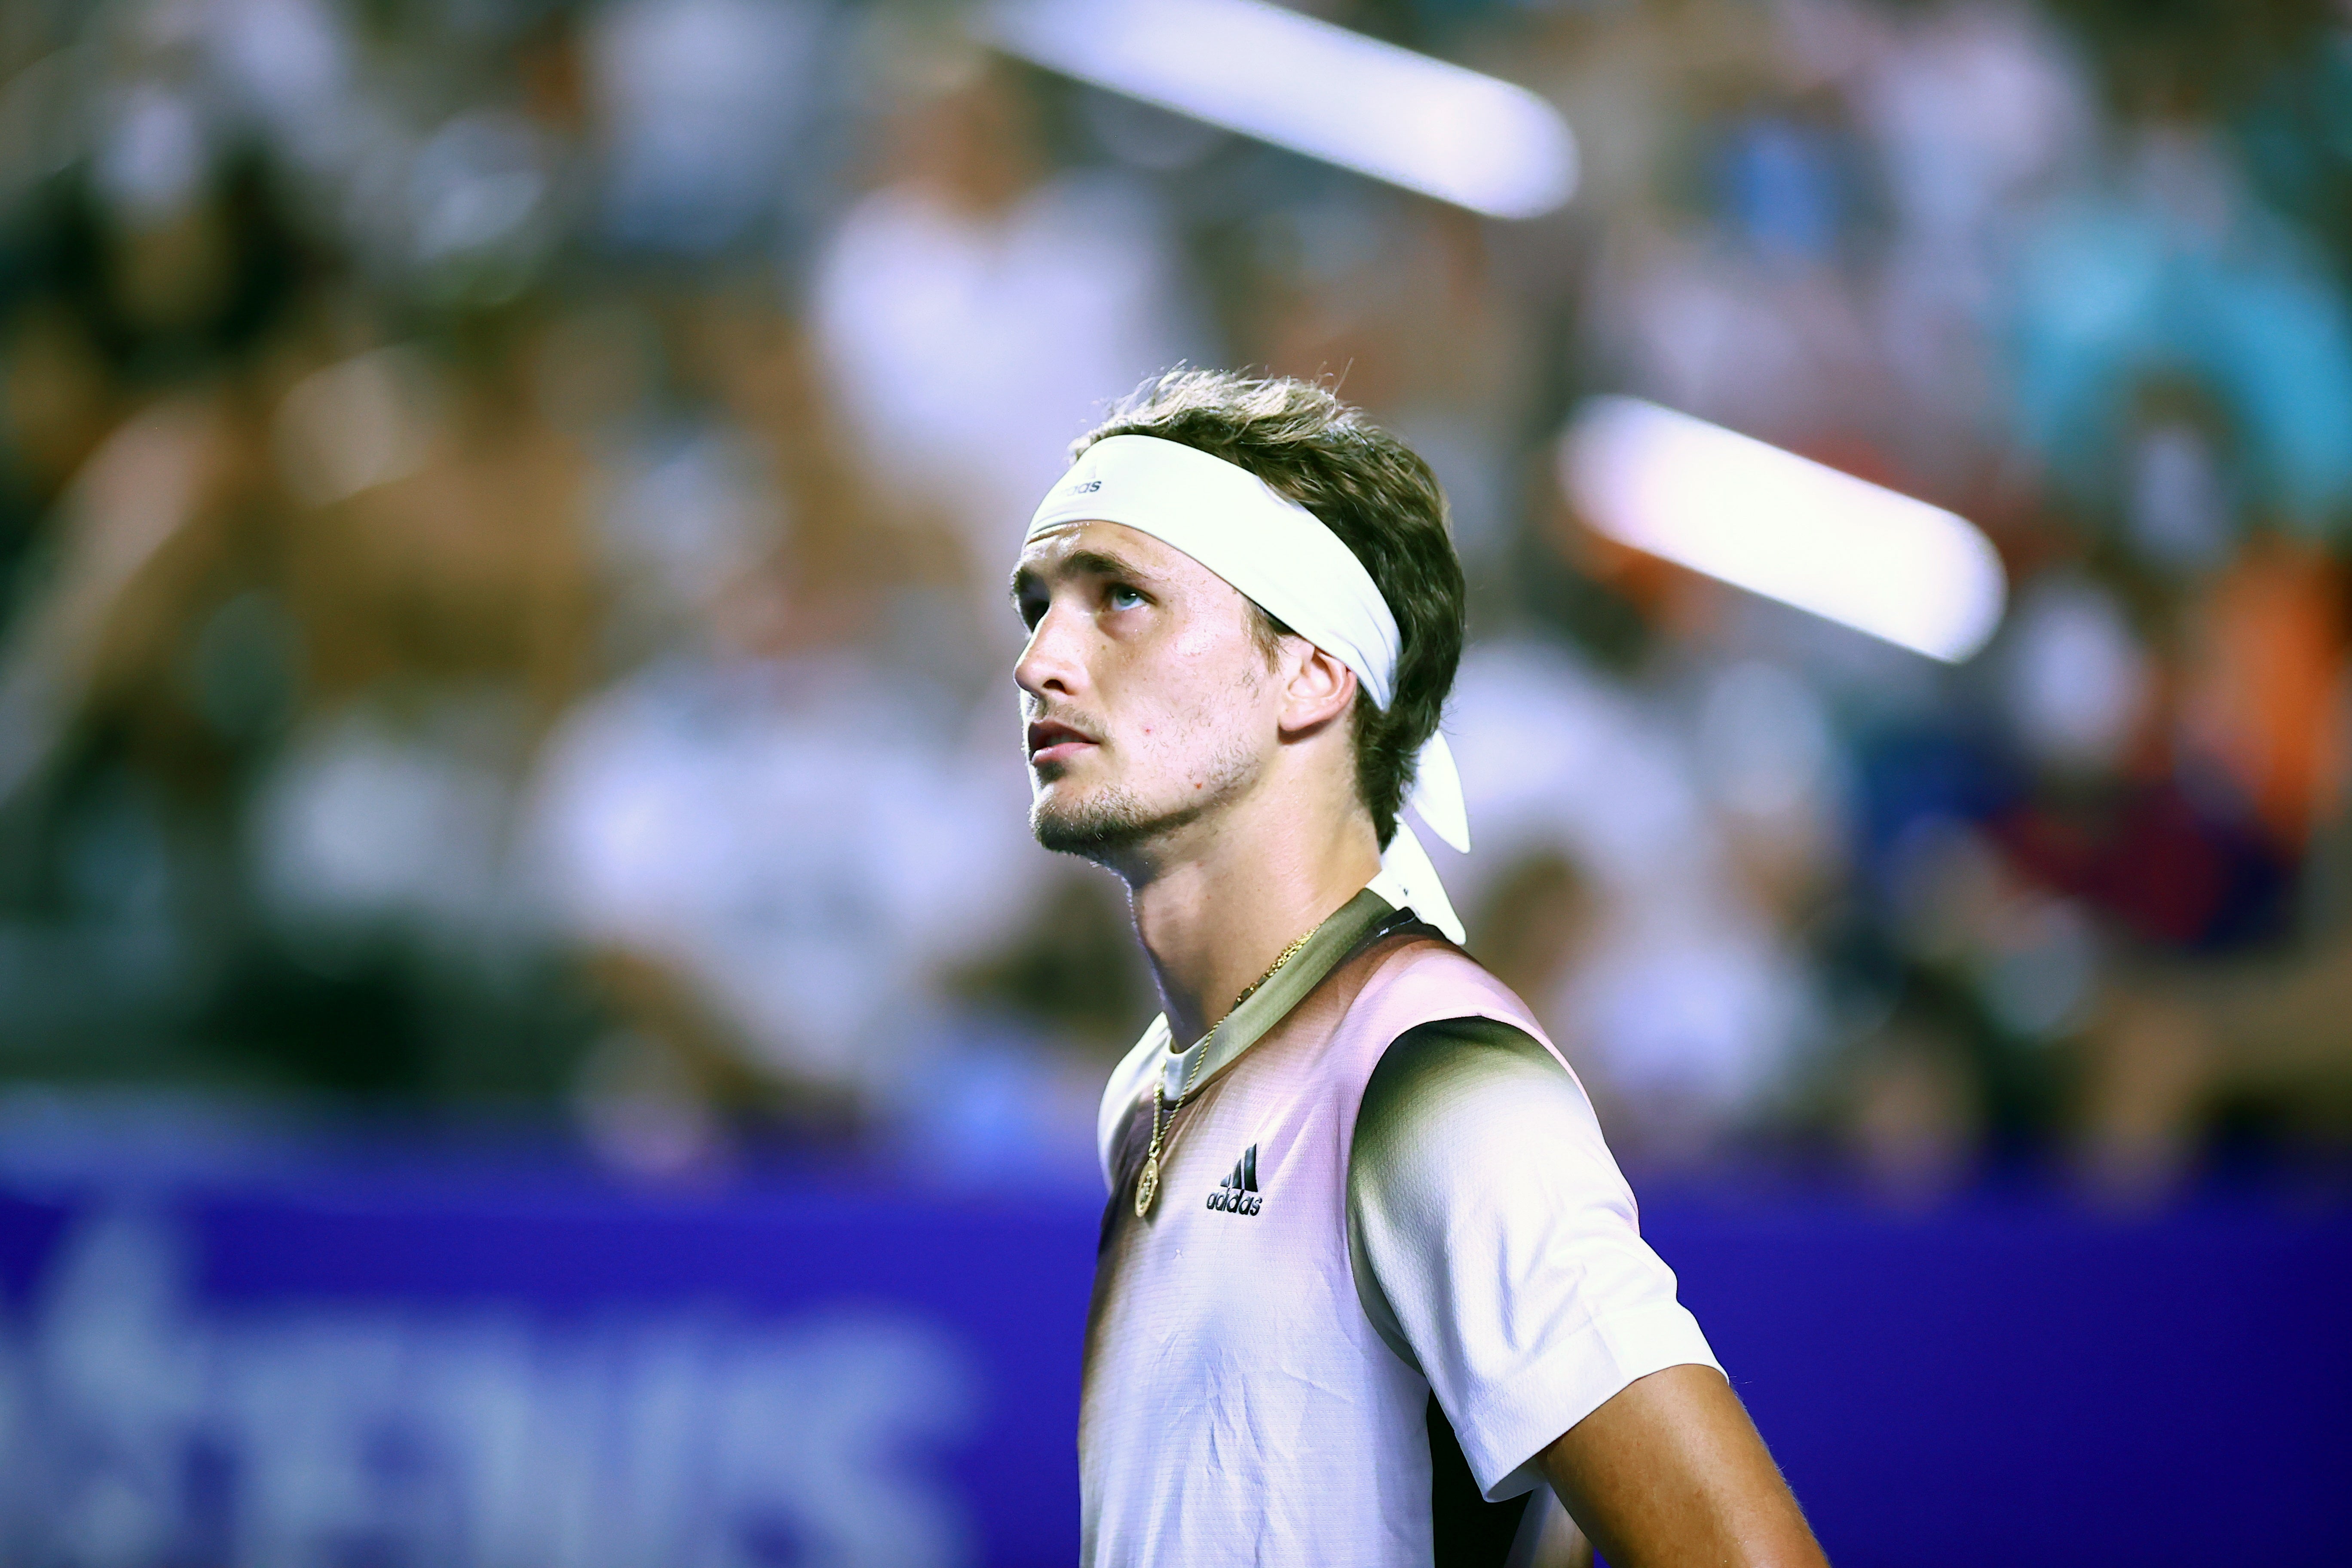 Alexander Zverev will play no further part in the Mexican Open